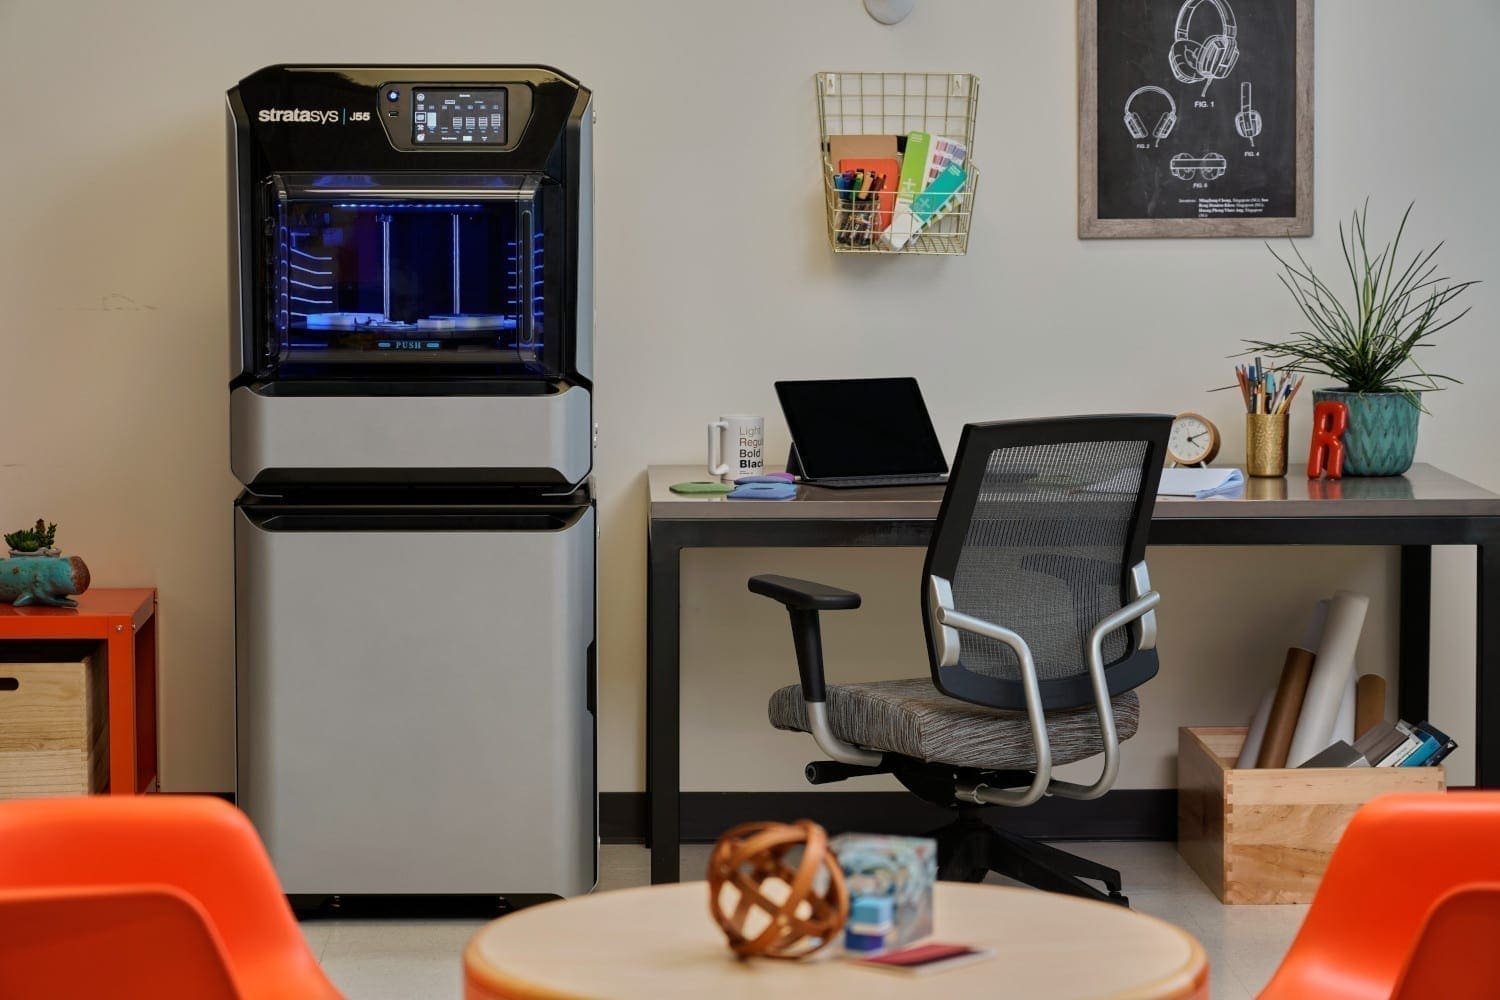 Stratasys J55 3D printer in an office setting